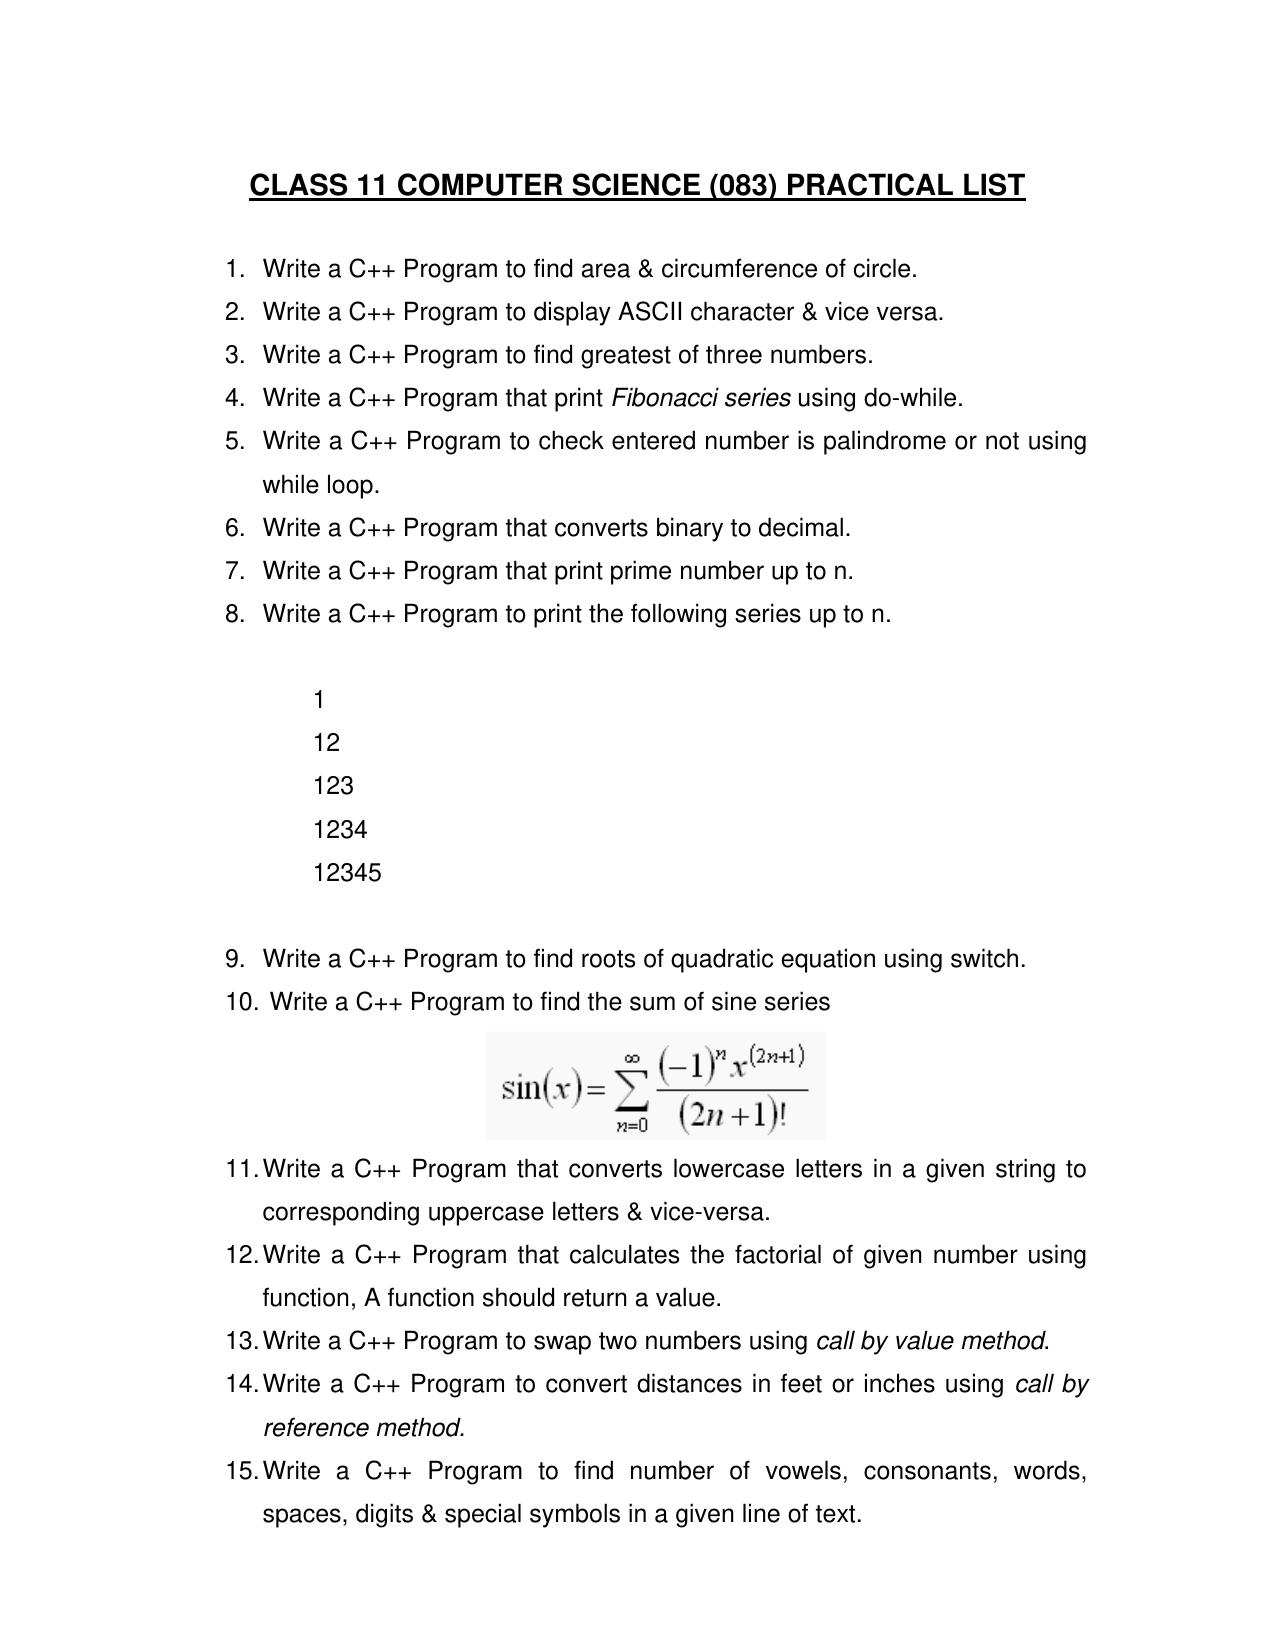 CBSE Worksheets for Class 11 Information Practices C++ Practical List Assignment - Page 1